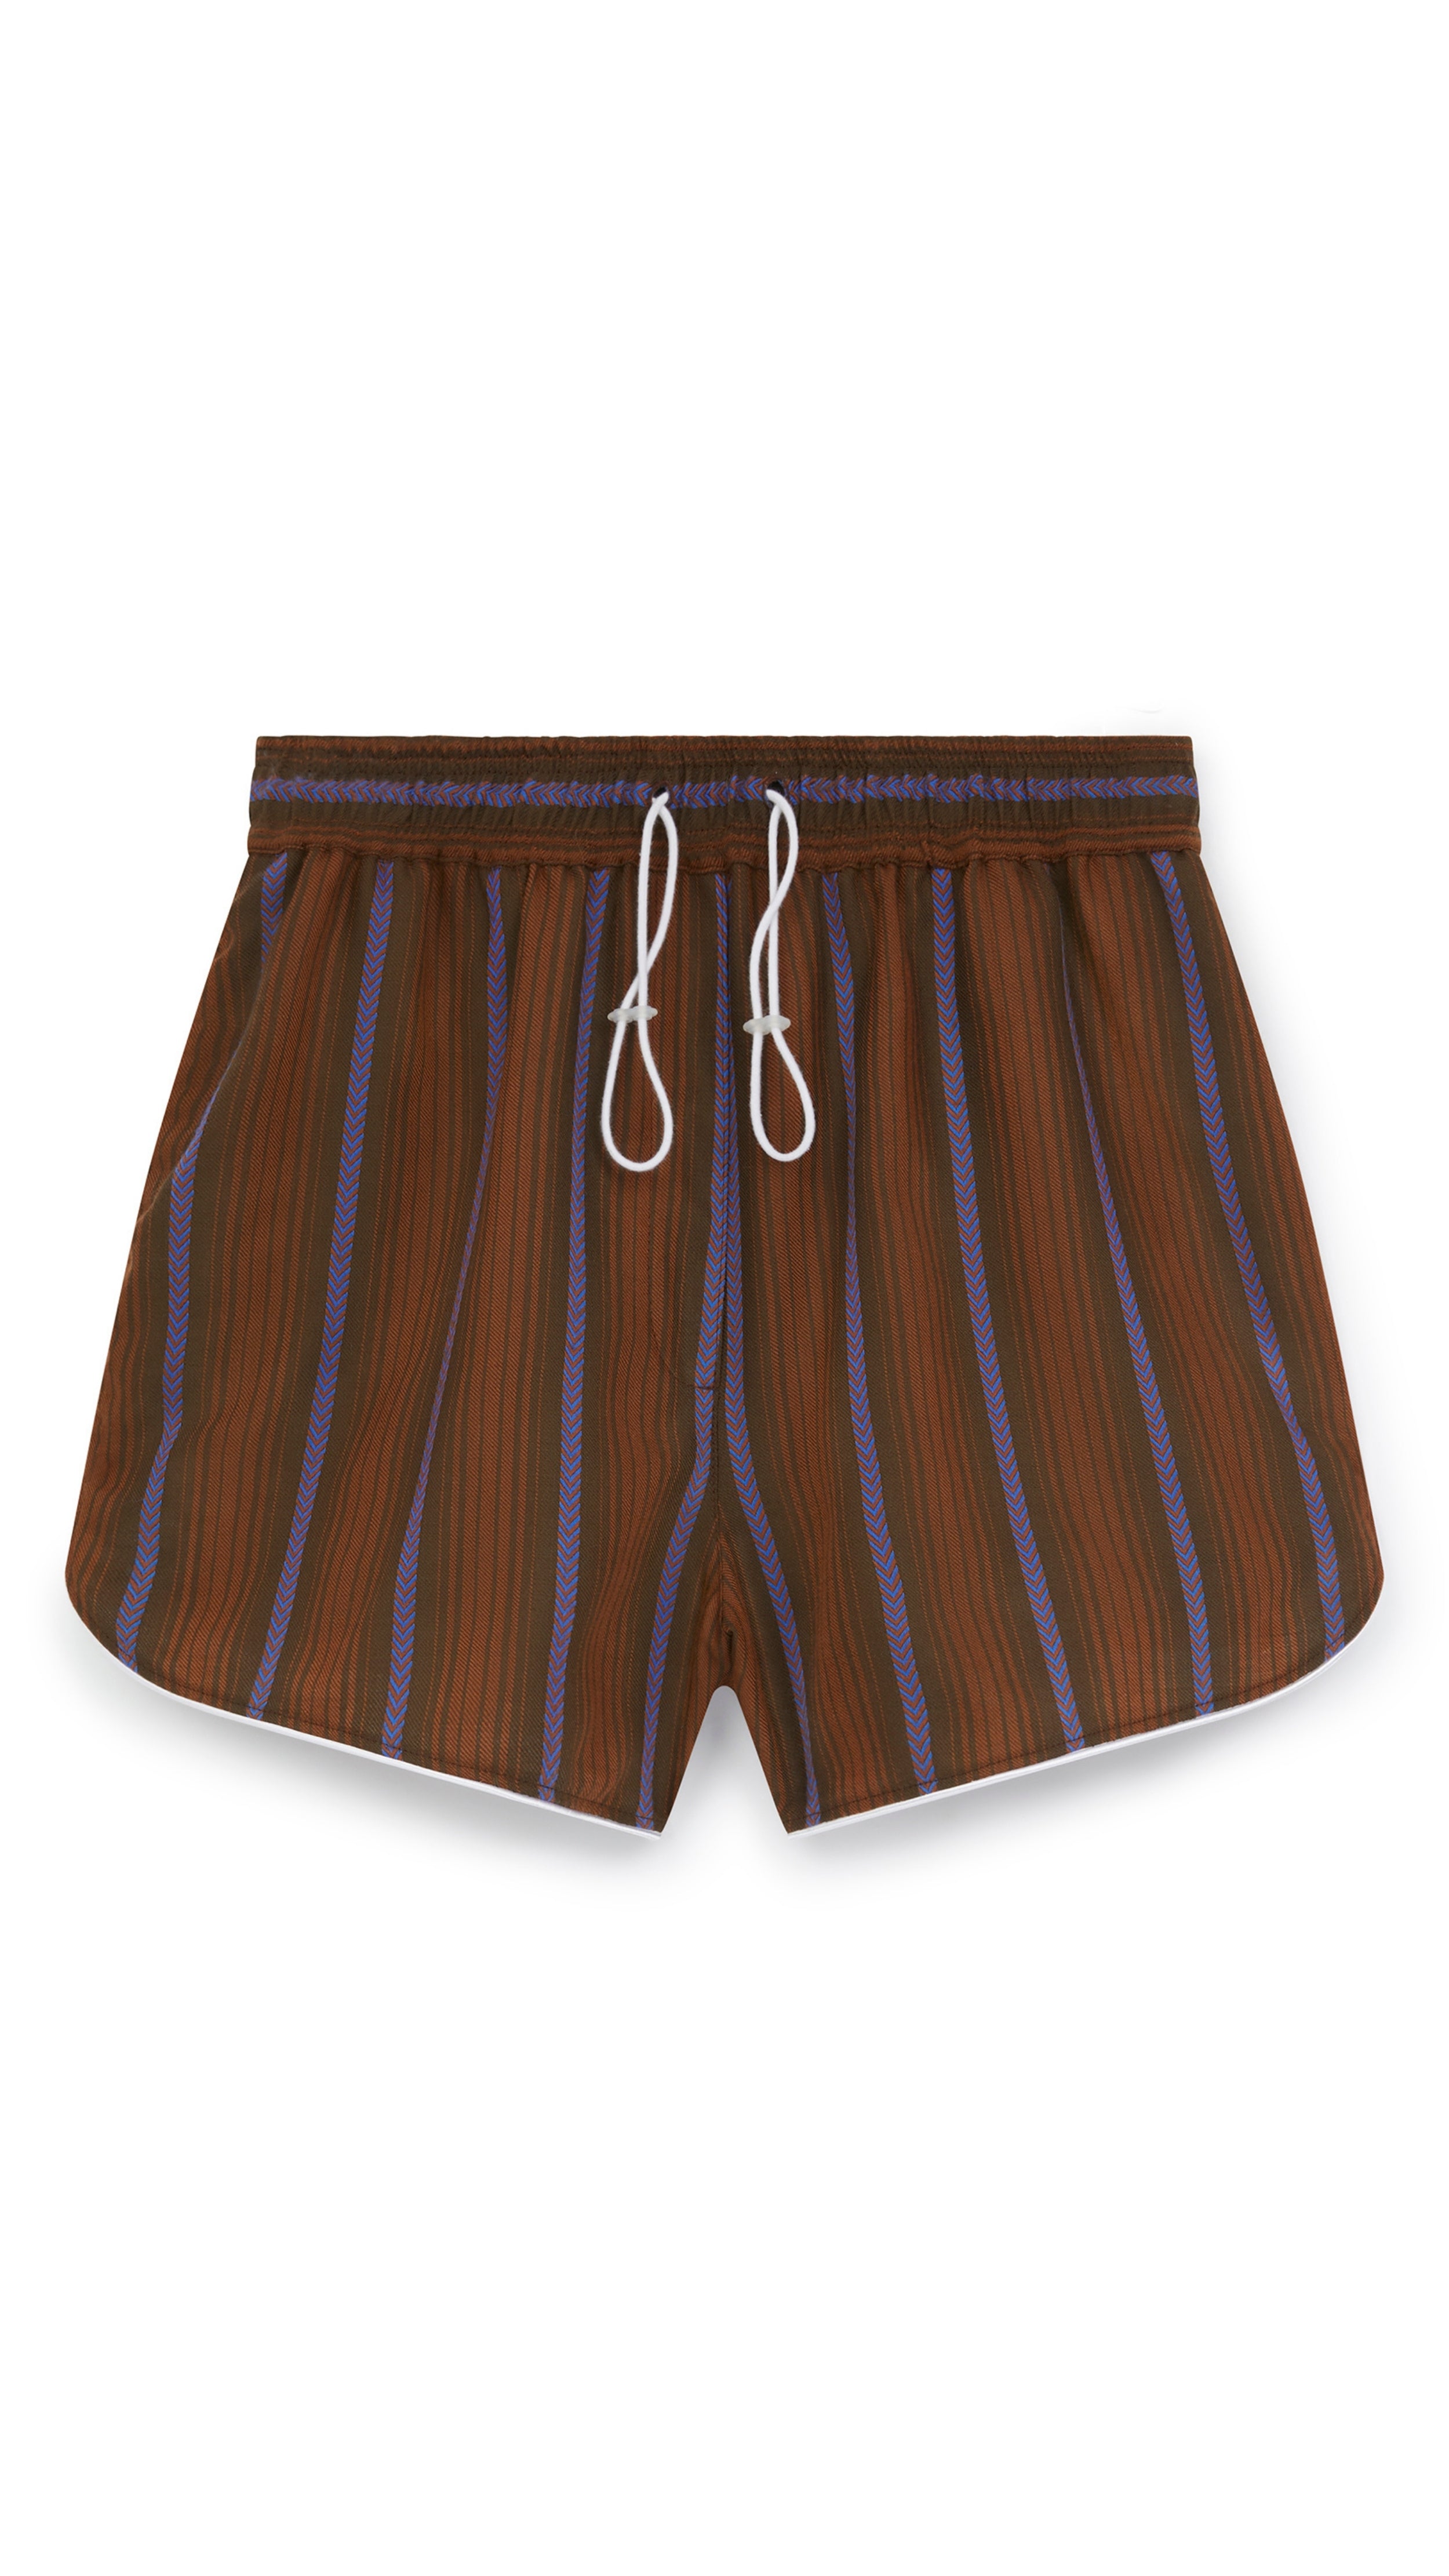 Wales Bonner The Life Shorts are made from Italian-made, lightweight herringbone summer wool fabric in deep brown and blue stripes. Classic atheltic shape these shorts have an elastic waistband, a draw string and contrasting white trim at the leg. Product photo shown flat.